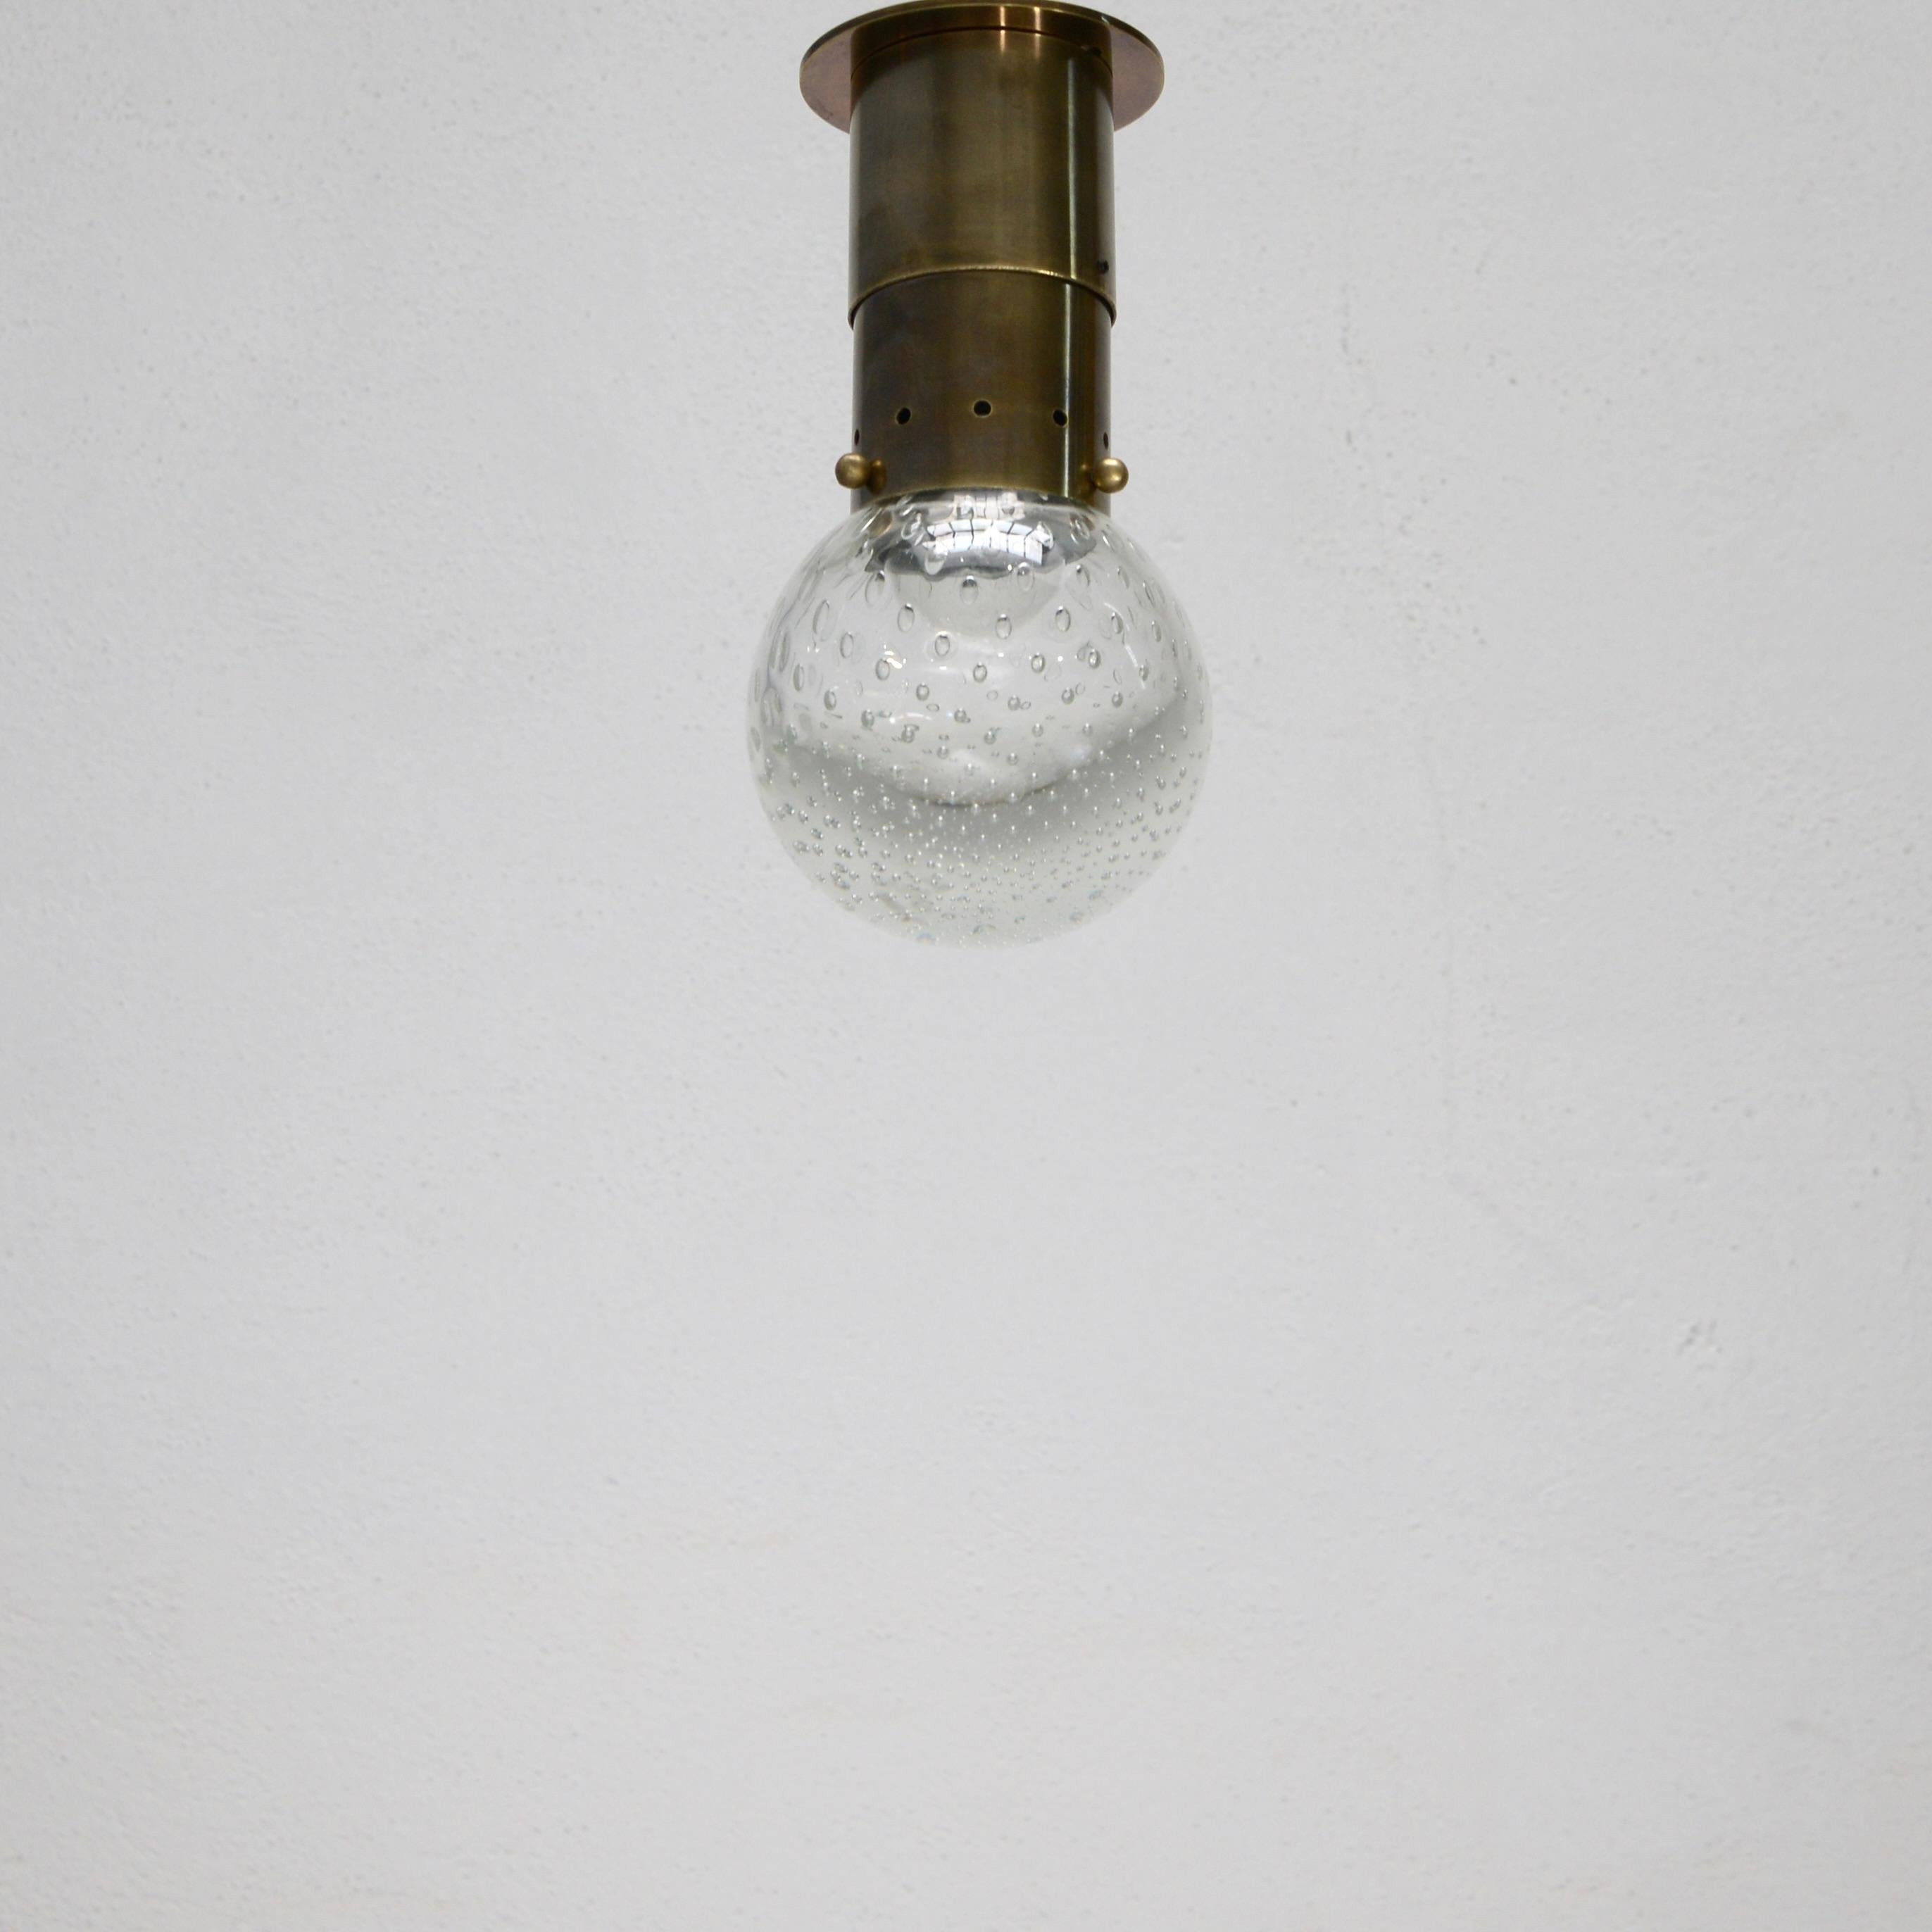 A stunning glass and brass ceiling light by Gino Sarfatti for Seguso from 1960s Italy. Patinated brass finish and blown glass, partially restored an wired with 1-E26 medium based socket for use in the US. Light bulb included with order.